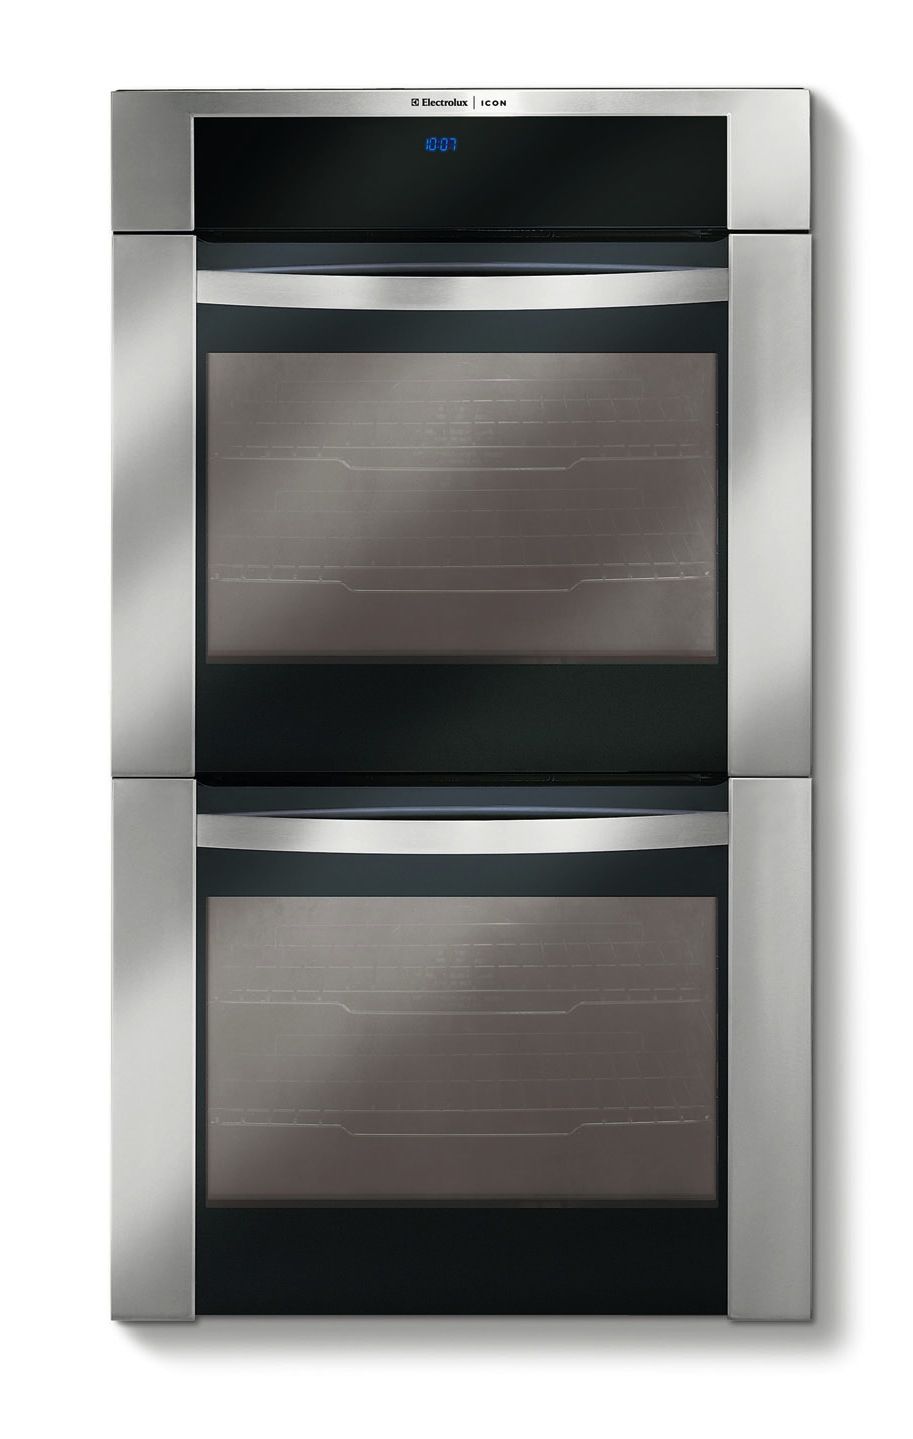  ICON 30 Inch Stainless Steel Electric Double Wall Oven E30EW85GSS